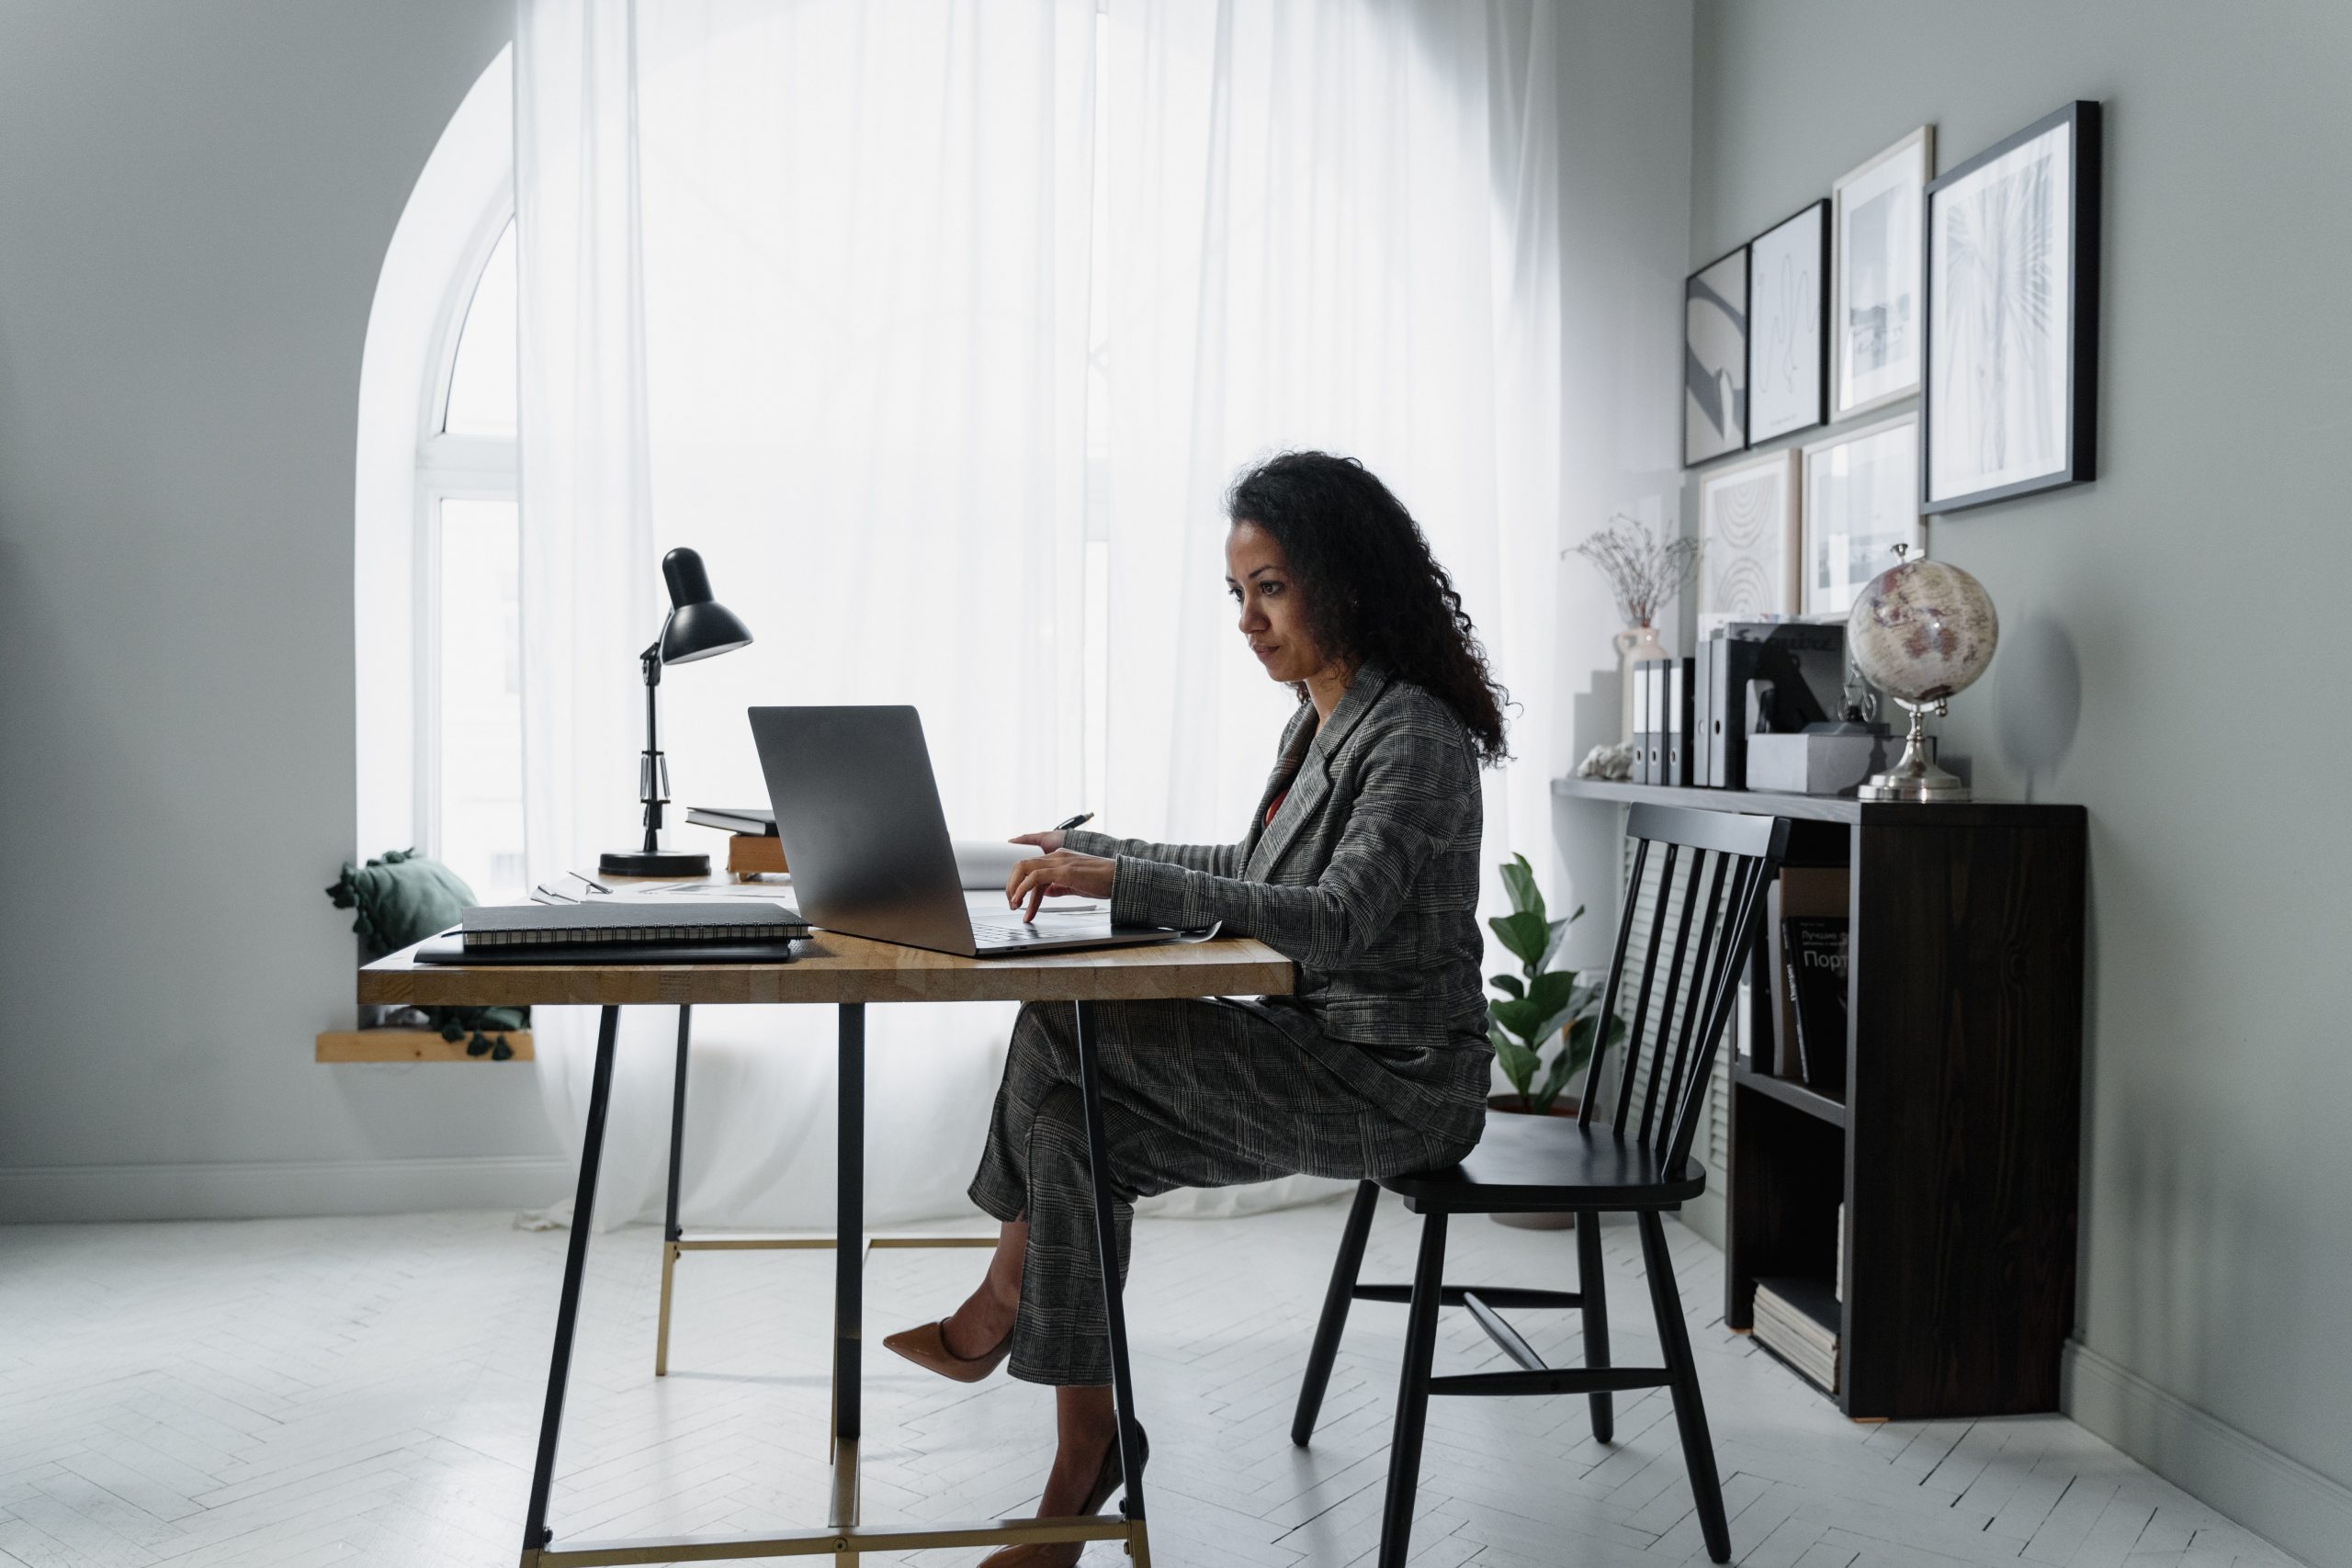 An entrepreneur focused on business growth while working on a laptop at a modern home office setup, embodying the concept of 'Amplifying Your Brand's Growth'.